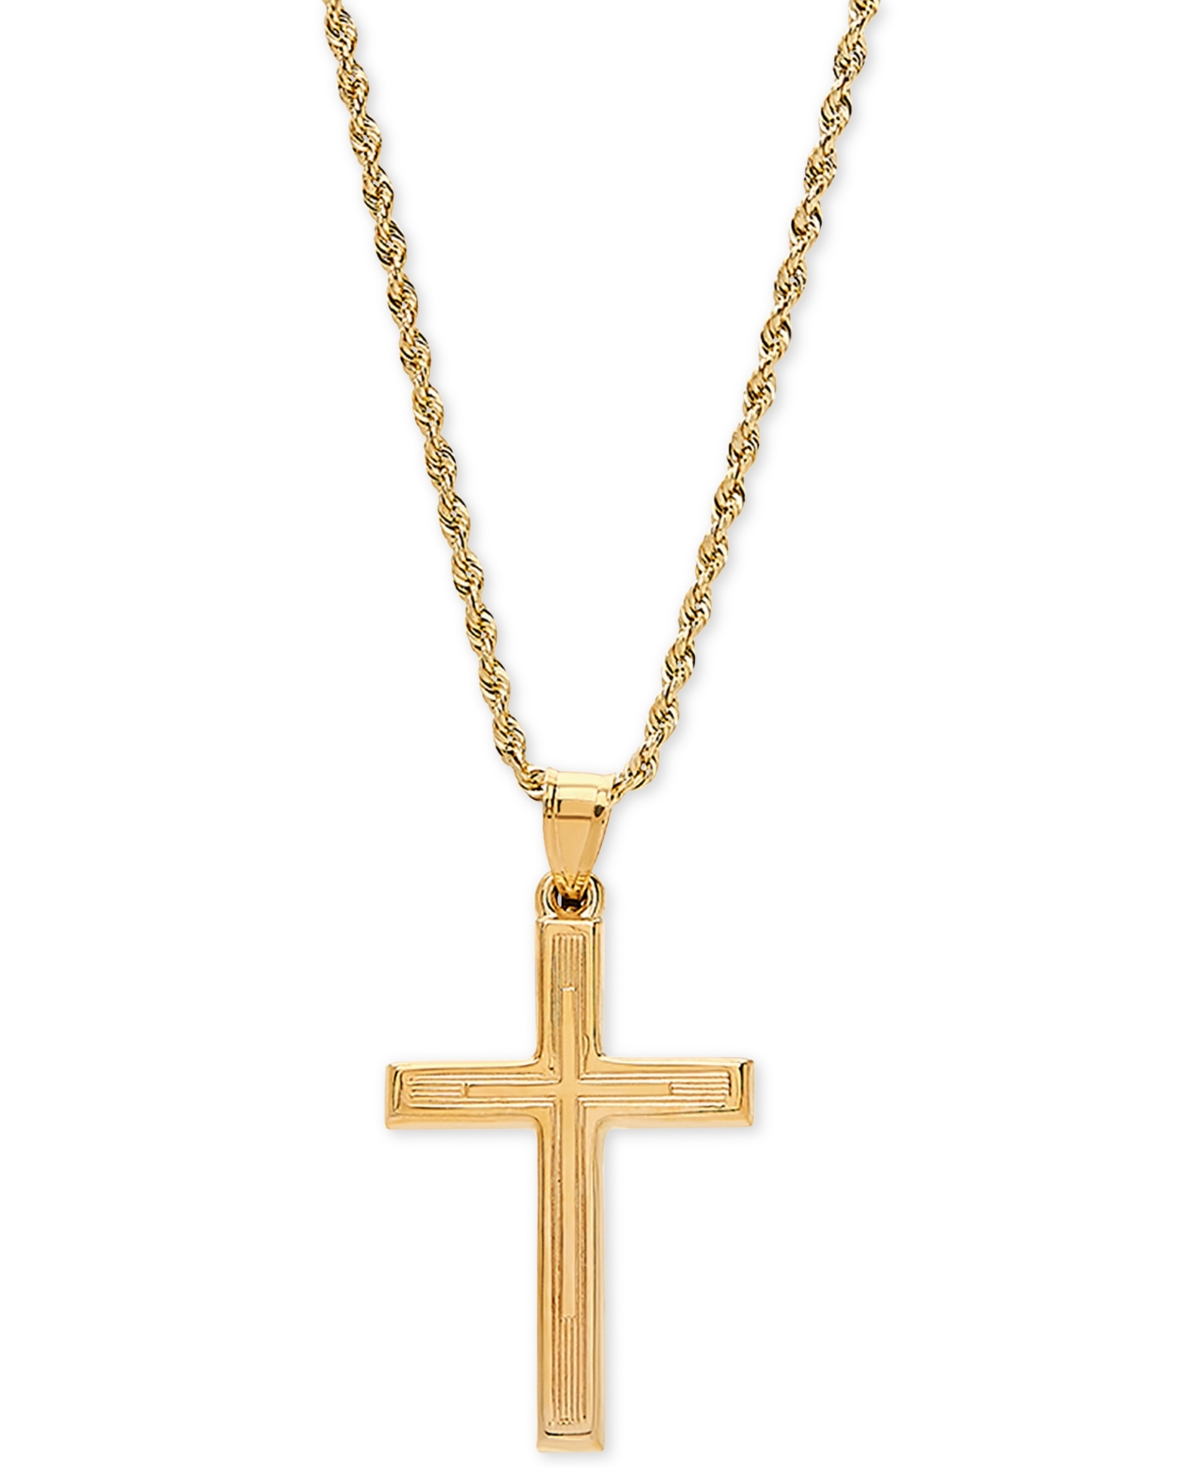 Engraved Cross 20" Pendant Necklace in 14k Gold - Yellow Gold